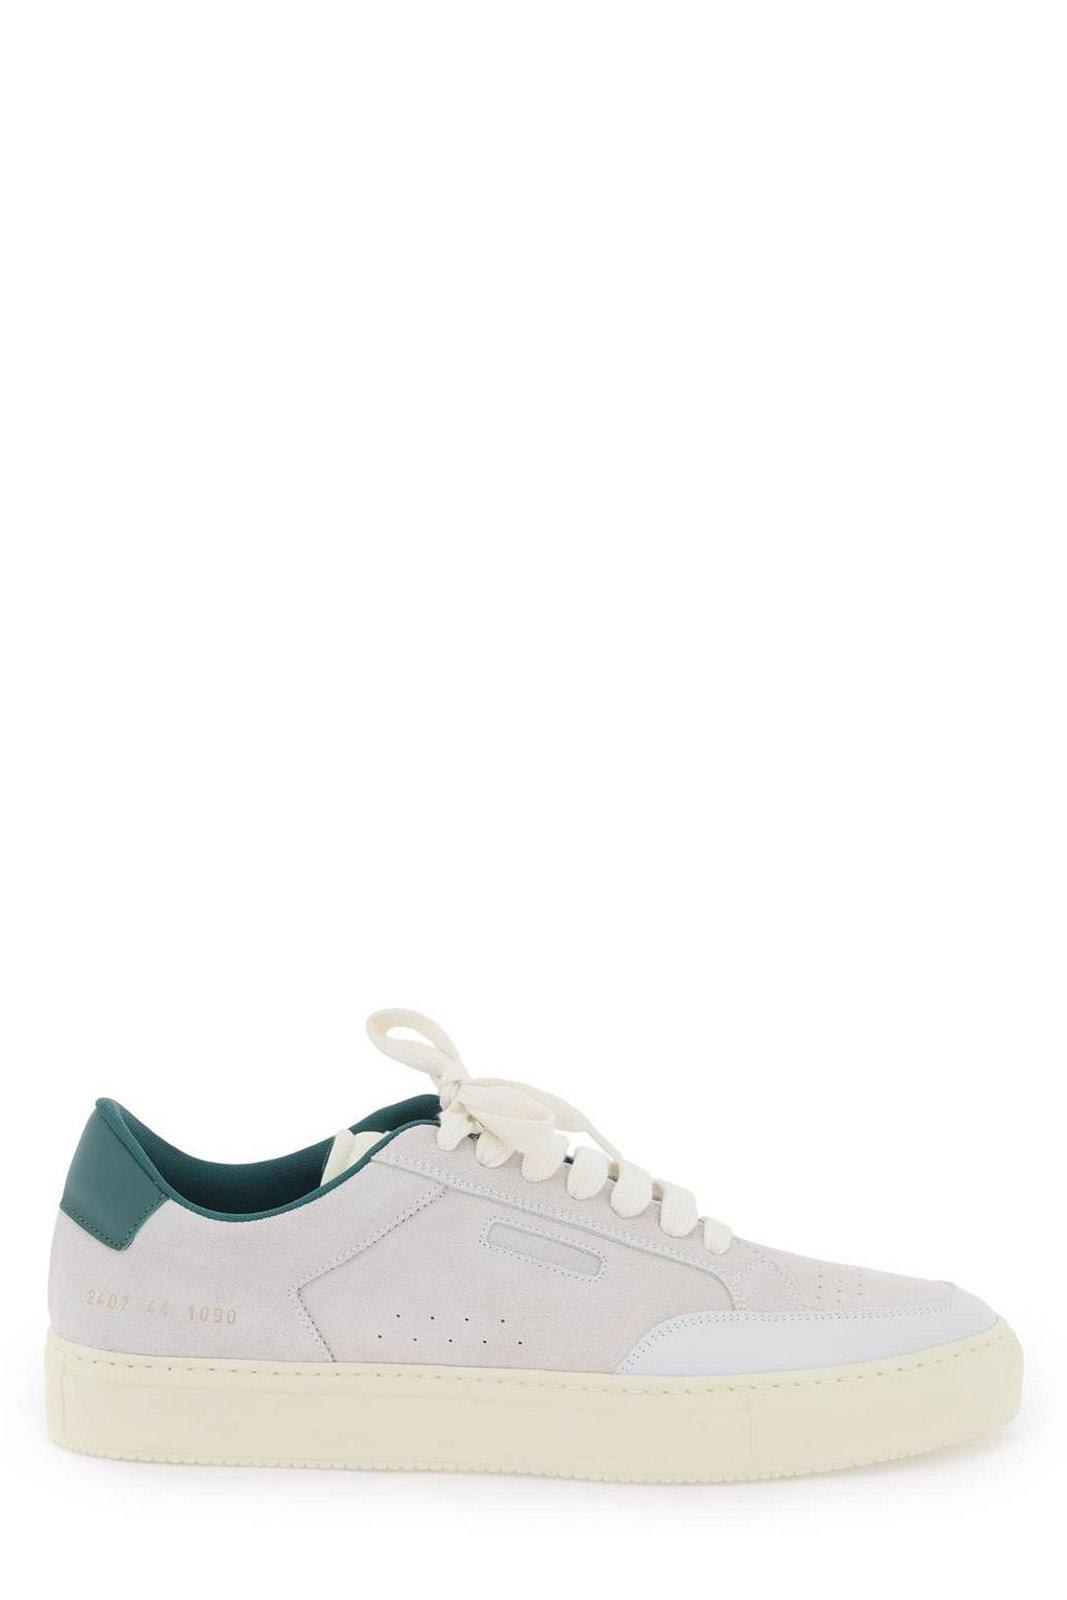 Shop Common Projects Achilles Lace-up Sneakers In Green